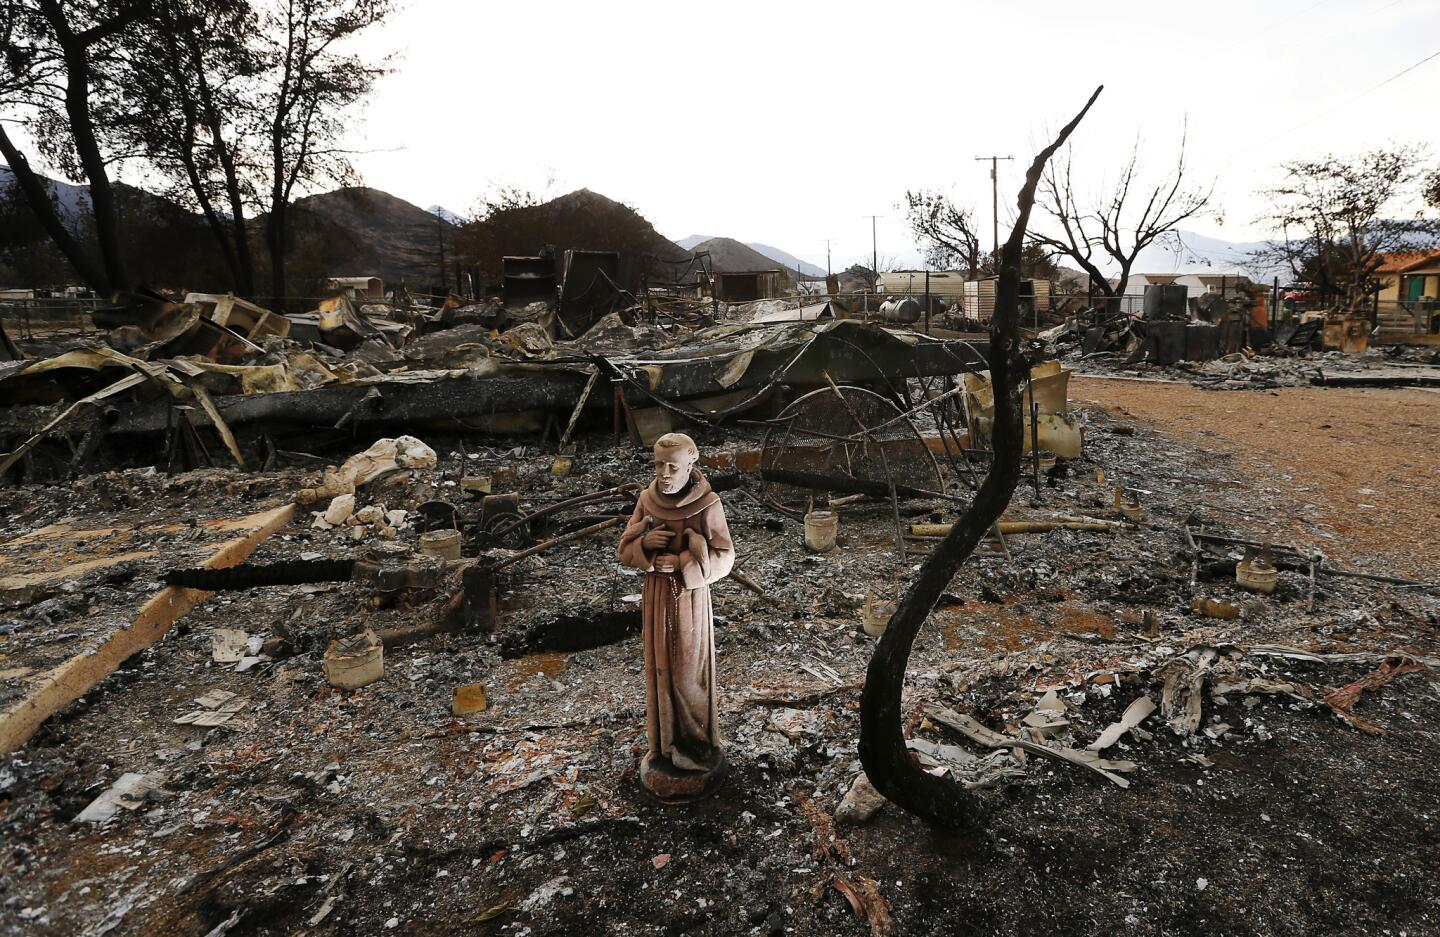 A religious icon stands in the charred remains of a neighborhood in South Lake.